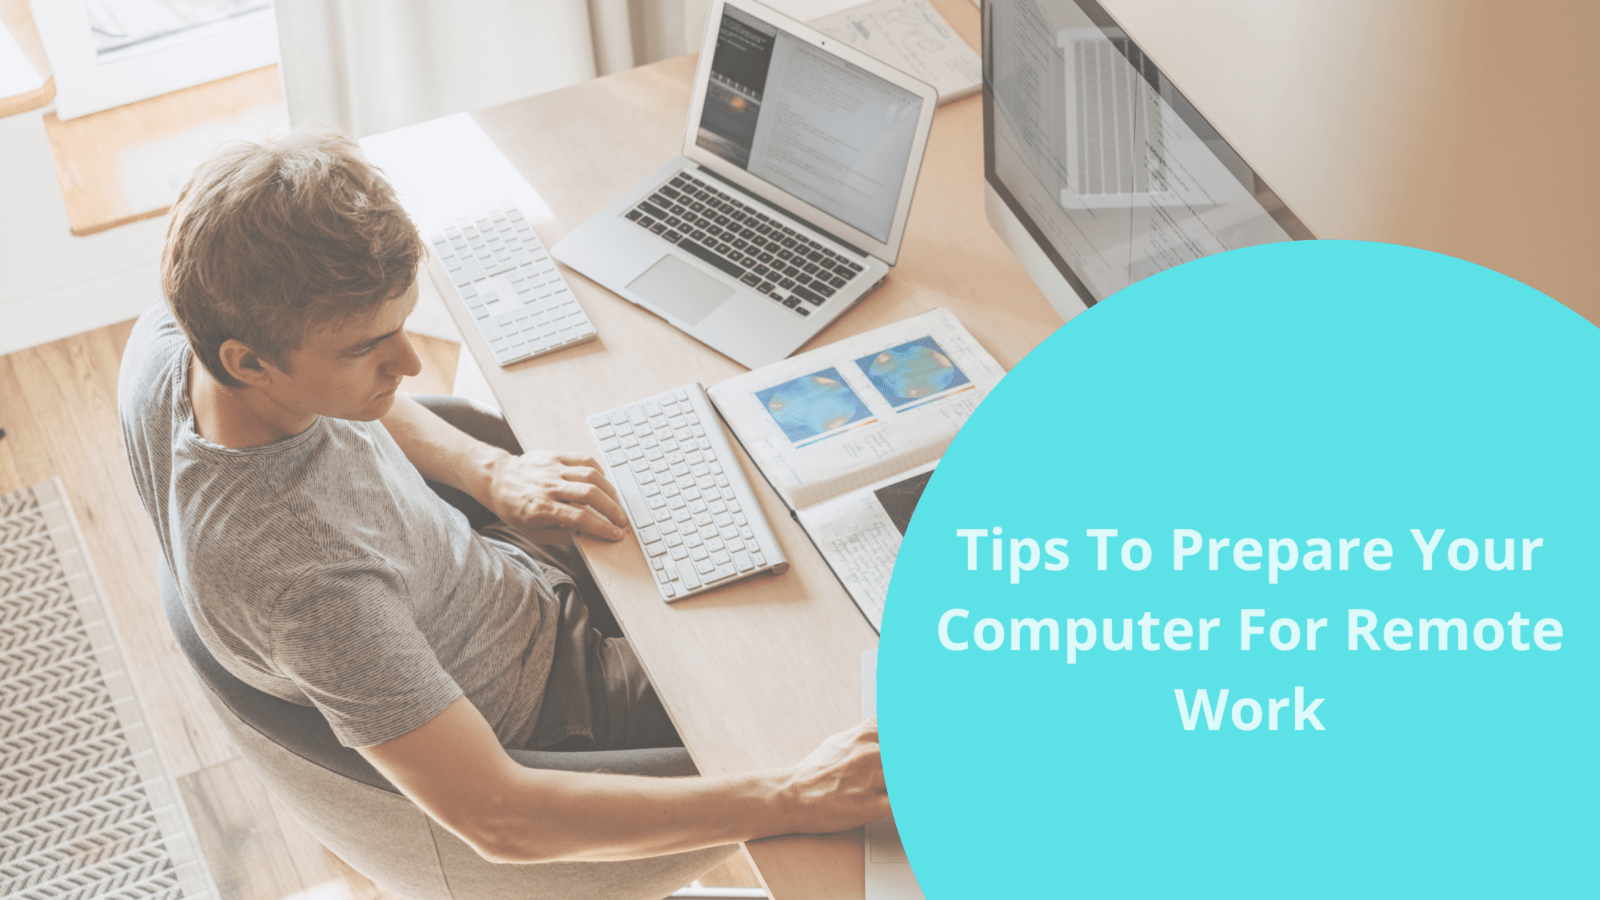 5 tips to prepare your computer for remote work | bookafy